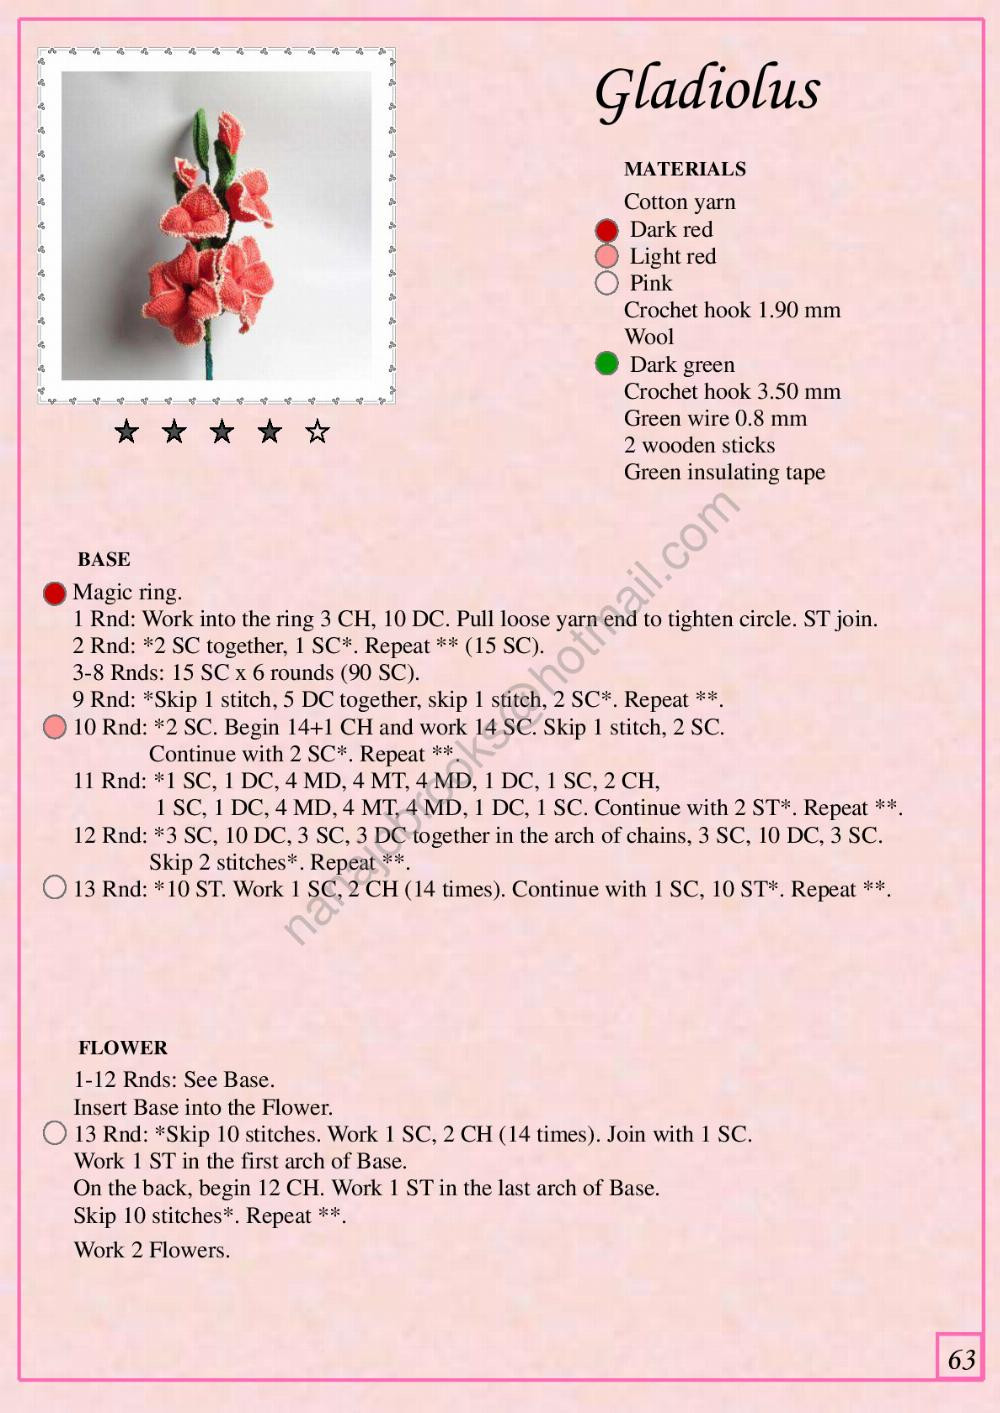 THE LITTLE RED DEVIL THE BOOK OF CROCHET FLOWERS 3